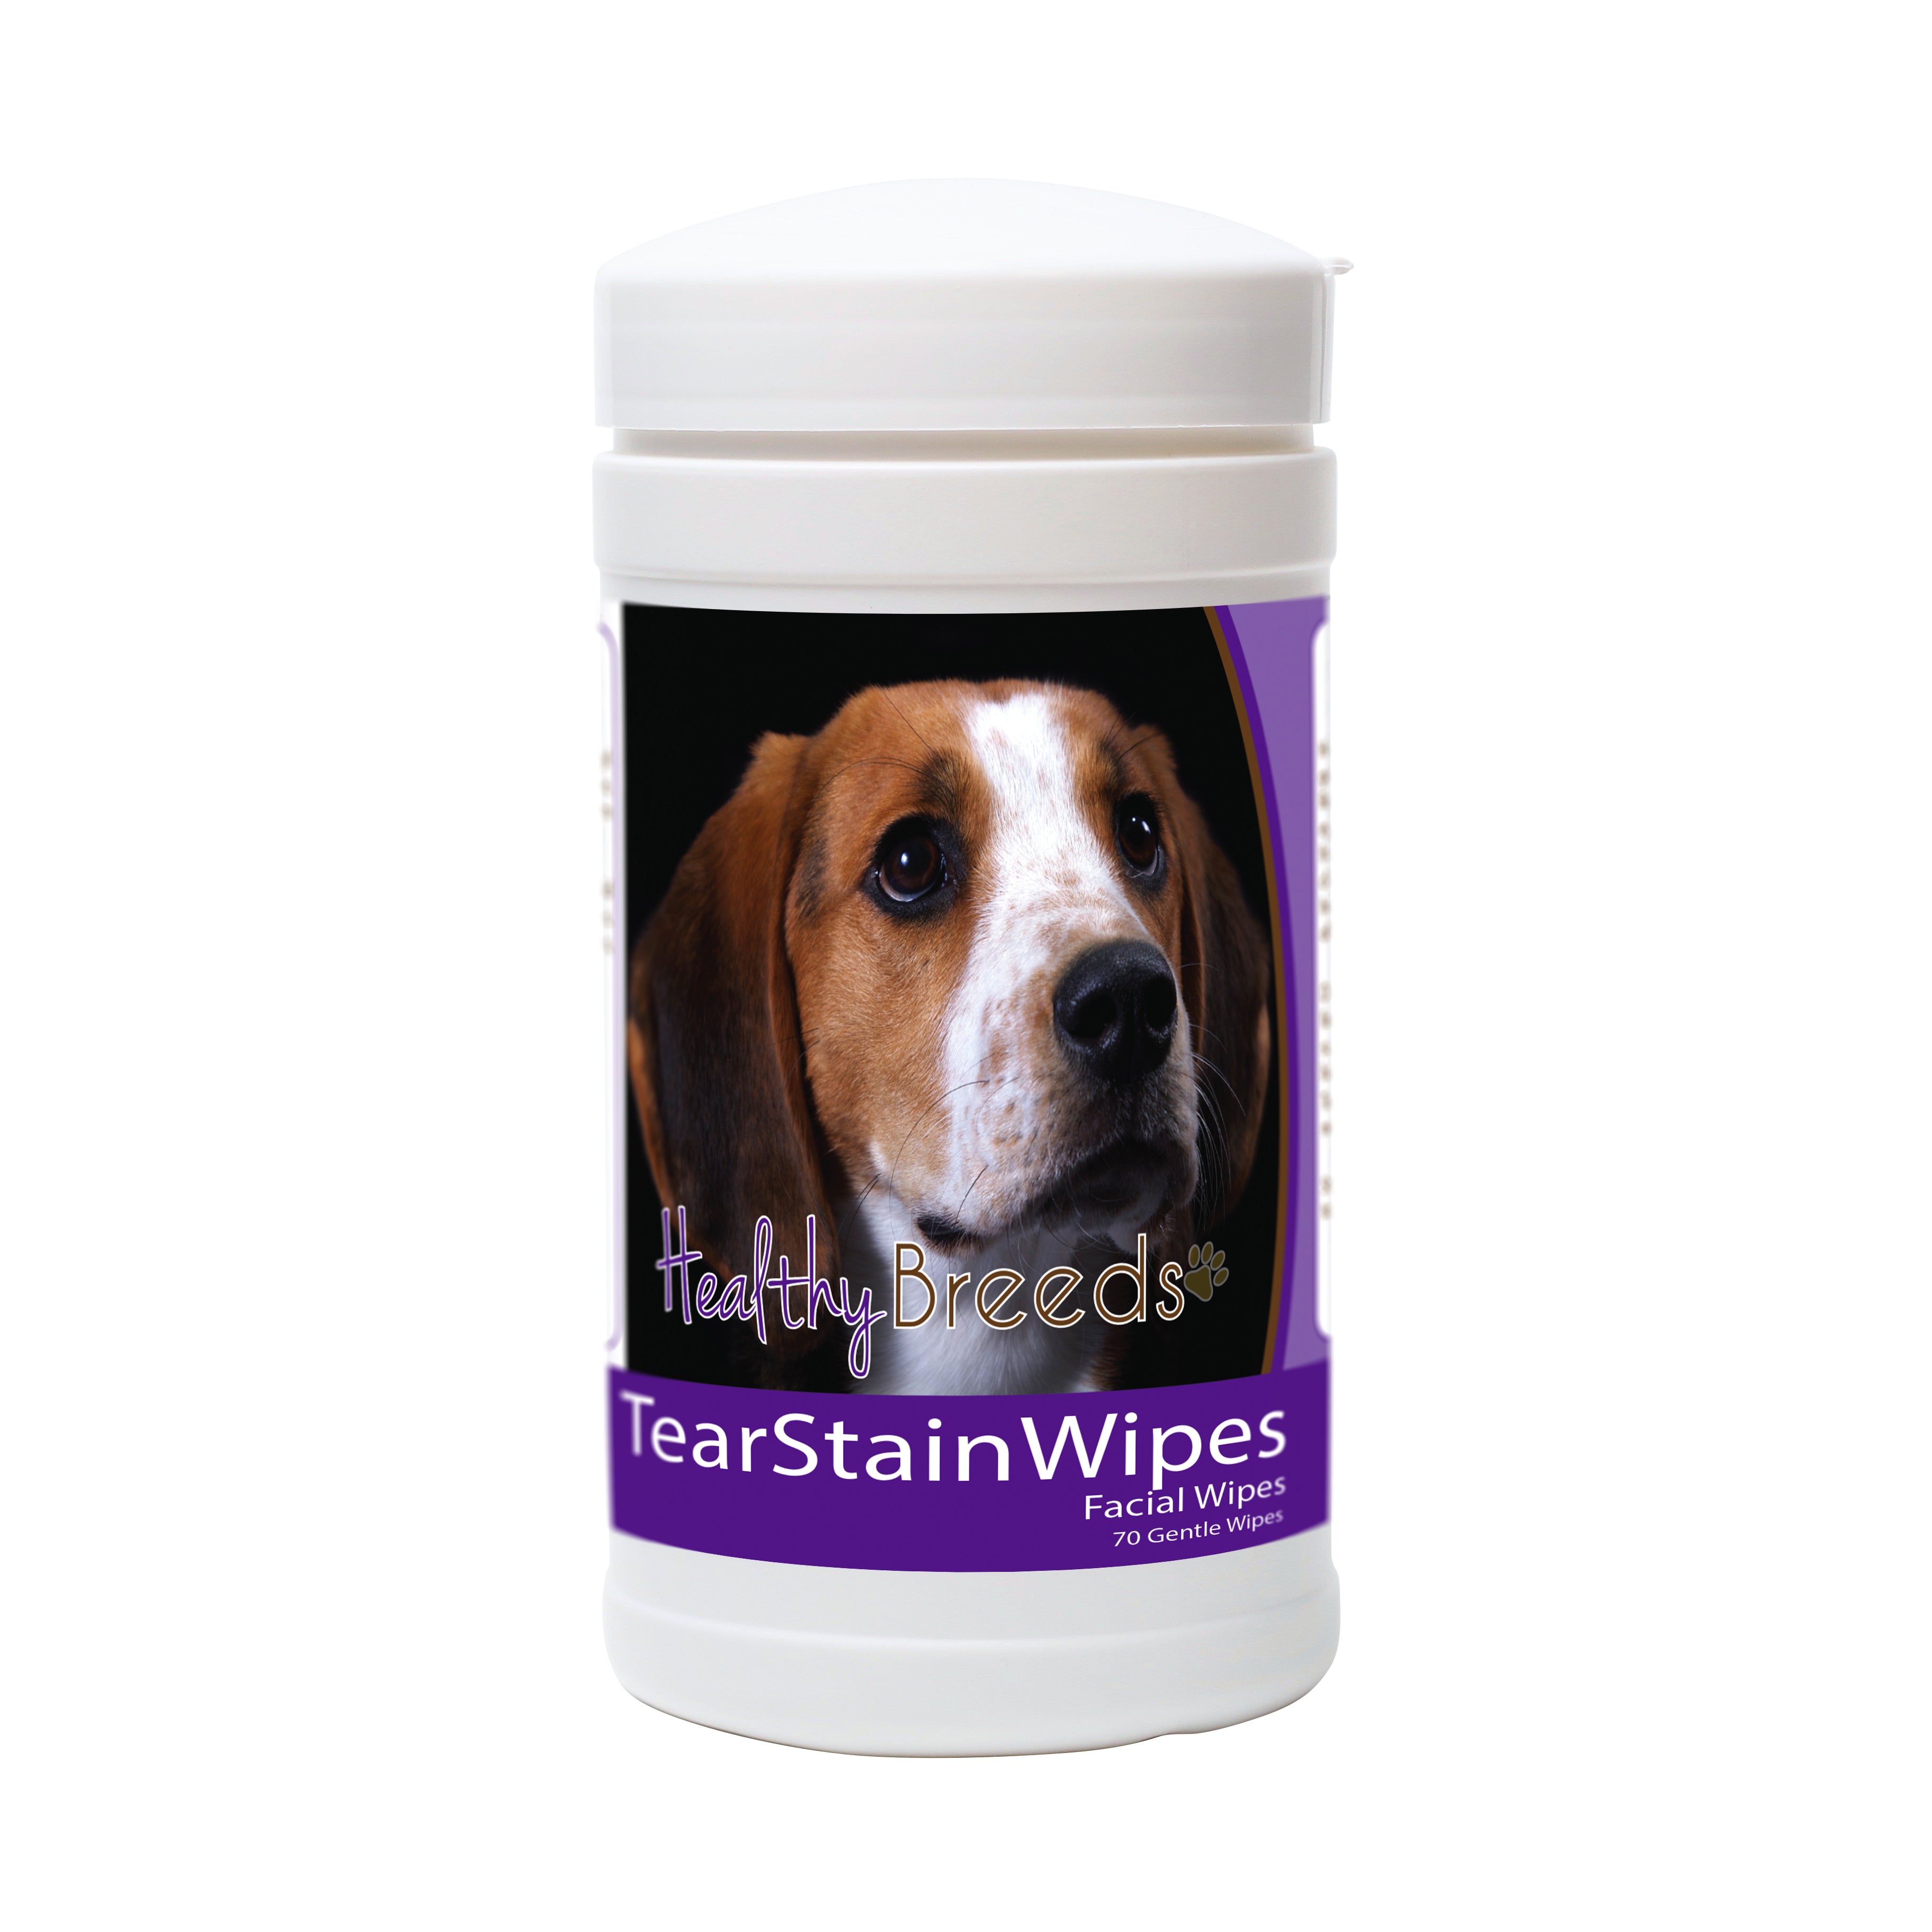 American English Coonhound Tear Stain Wipes 70 Count